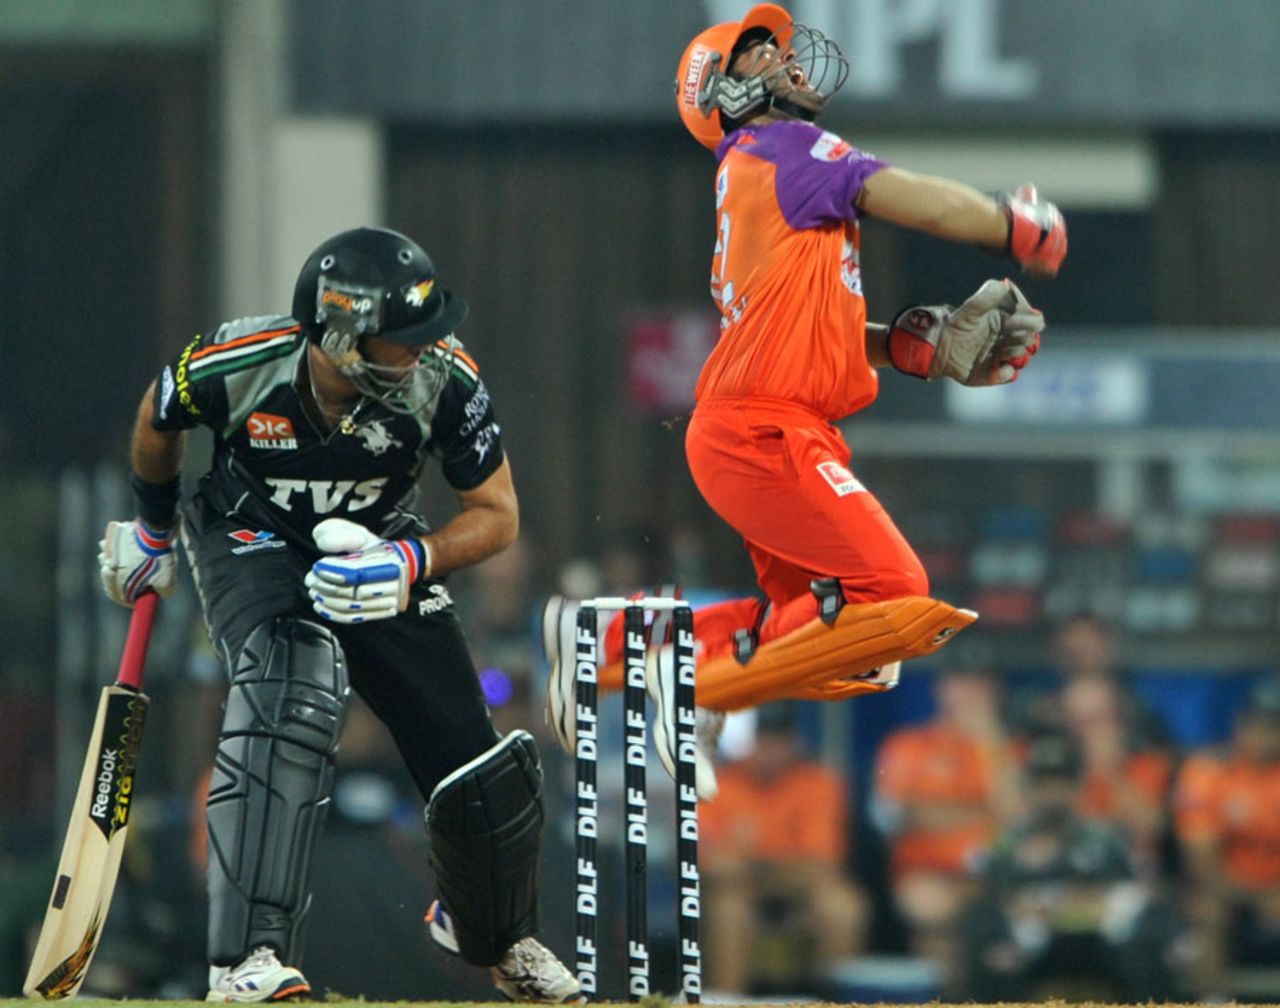 Parthiv Patel is delighted after catching Yuvraj Singh off an attempted cut, Pune Warriors v Kochi Tuskers Kerala, IPL 2011, Navi Mumbai, April 13, 2011